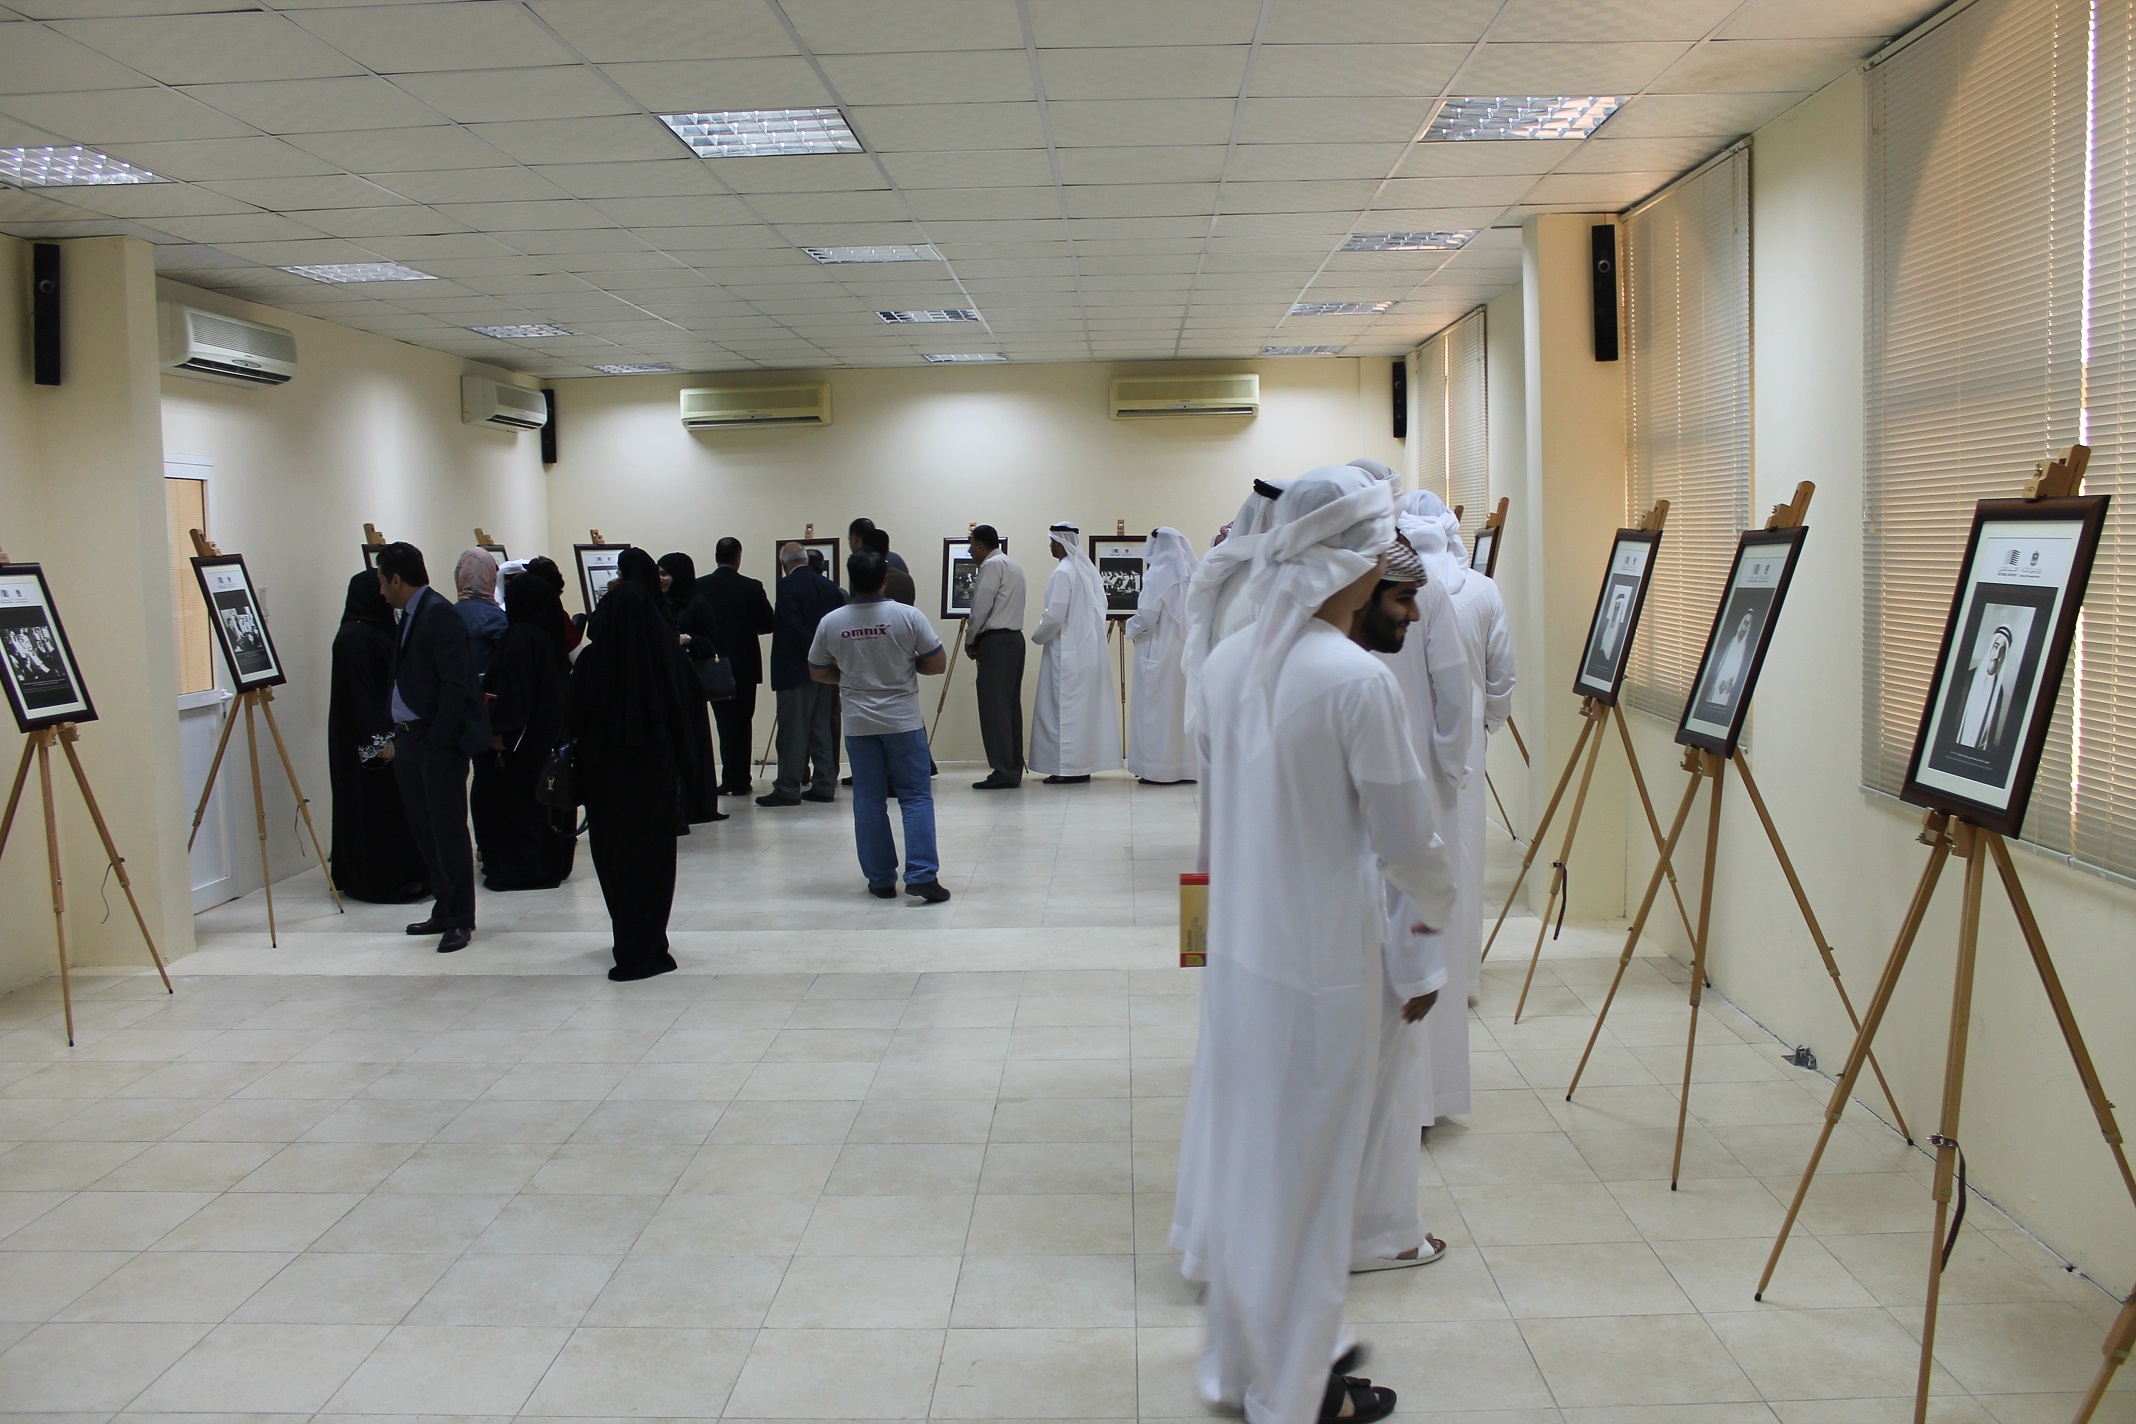 Exhibition of Photos and Documents in the Al Ain University